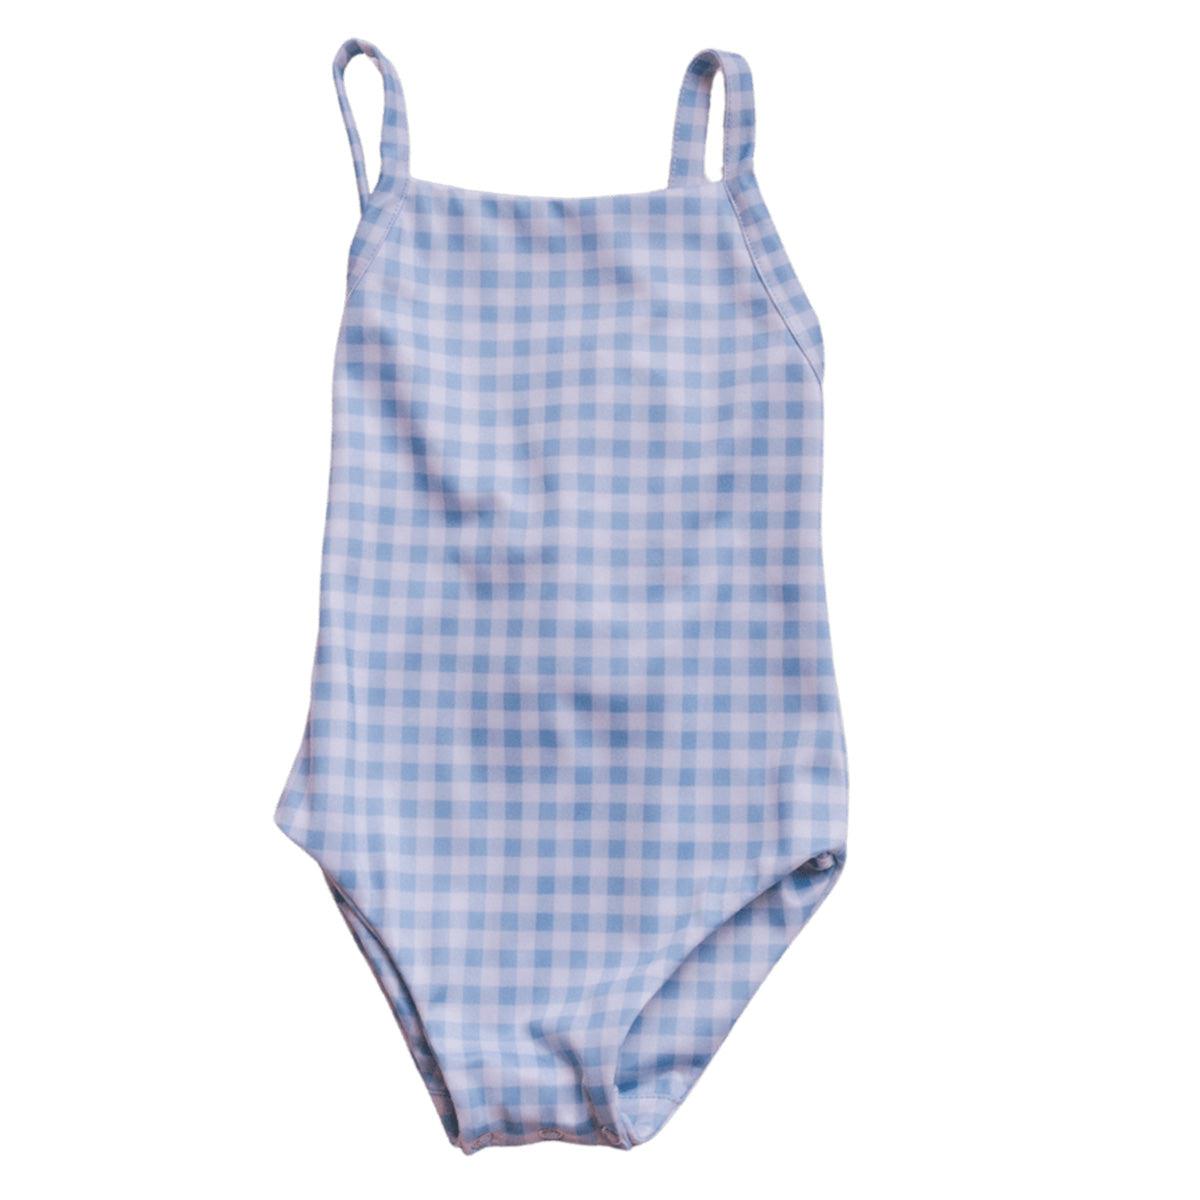 Azure and Apricot Gingham Collection - Mara One-Piece